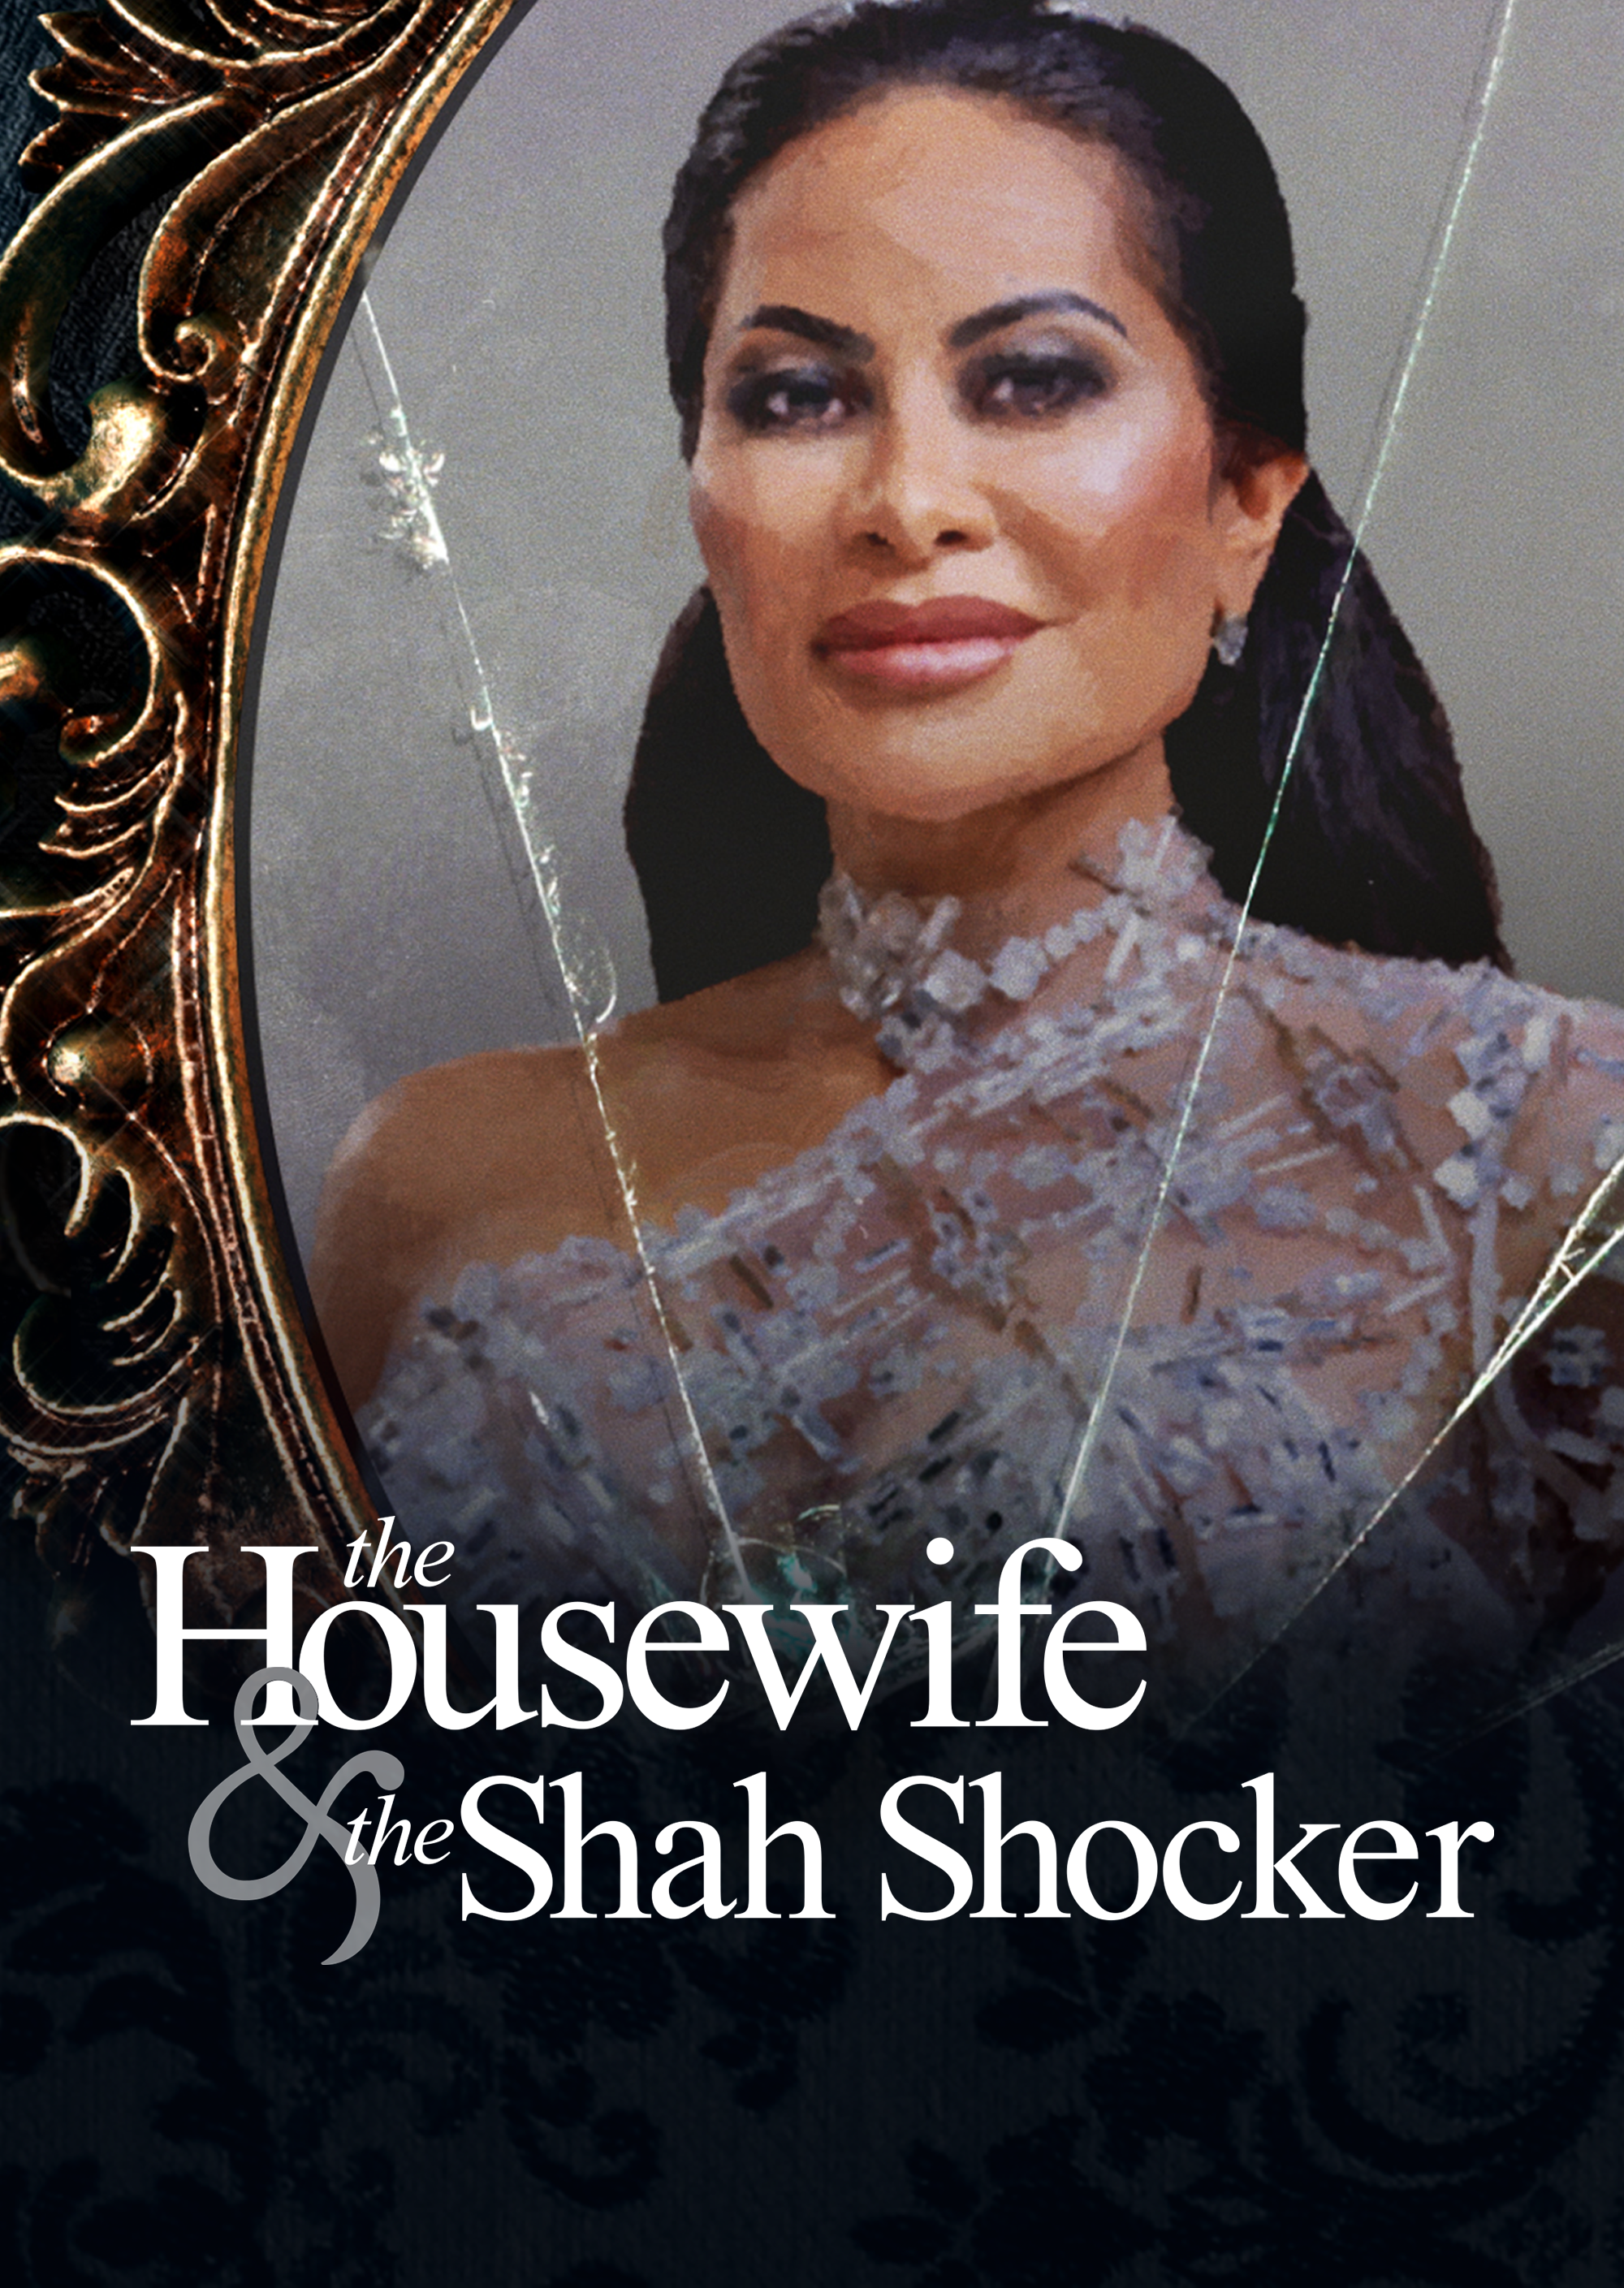 The Housewife & the Shah Shocker